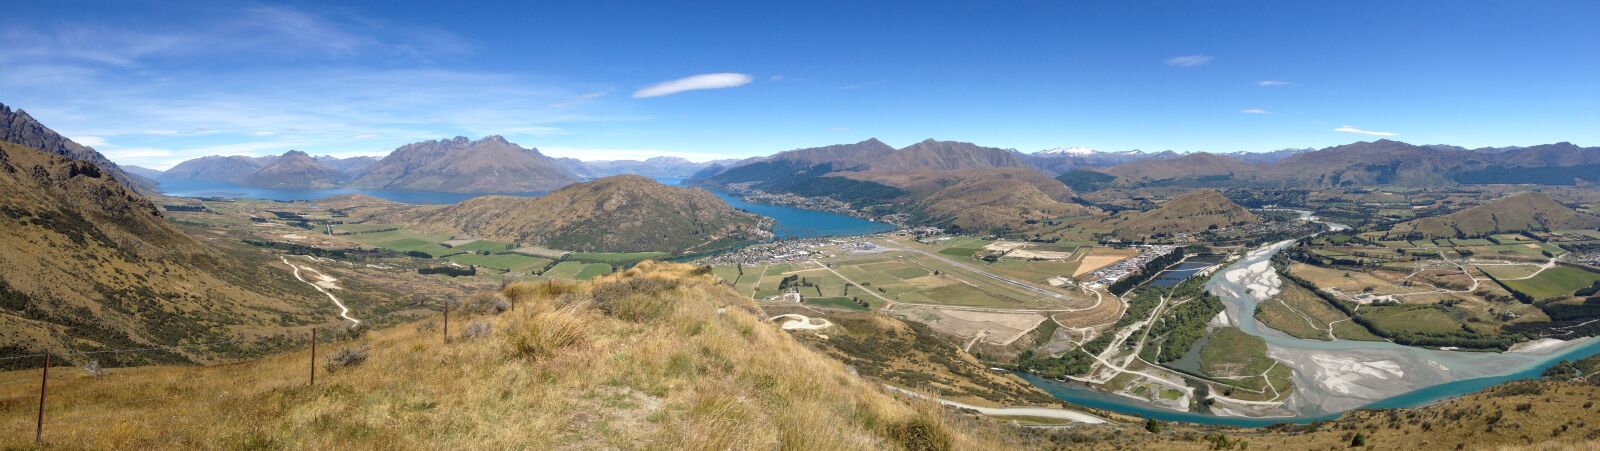 Apple iPhone 4S sample photo. Queenstown, lake wakatipu, southern photography